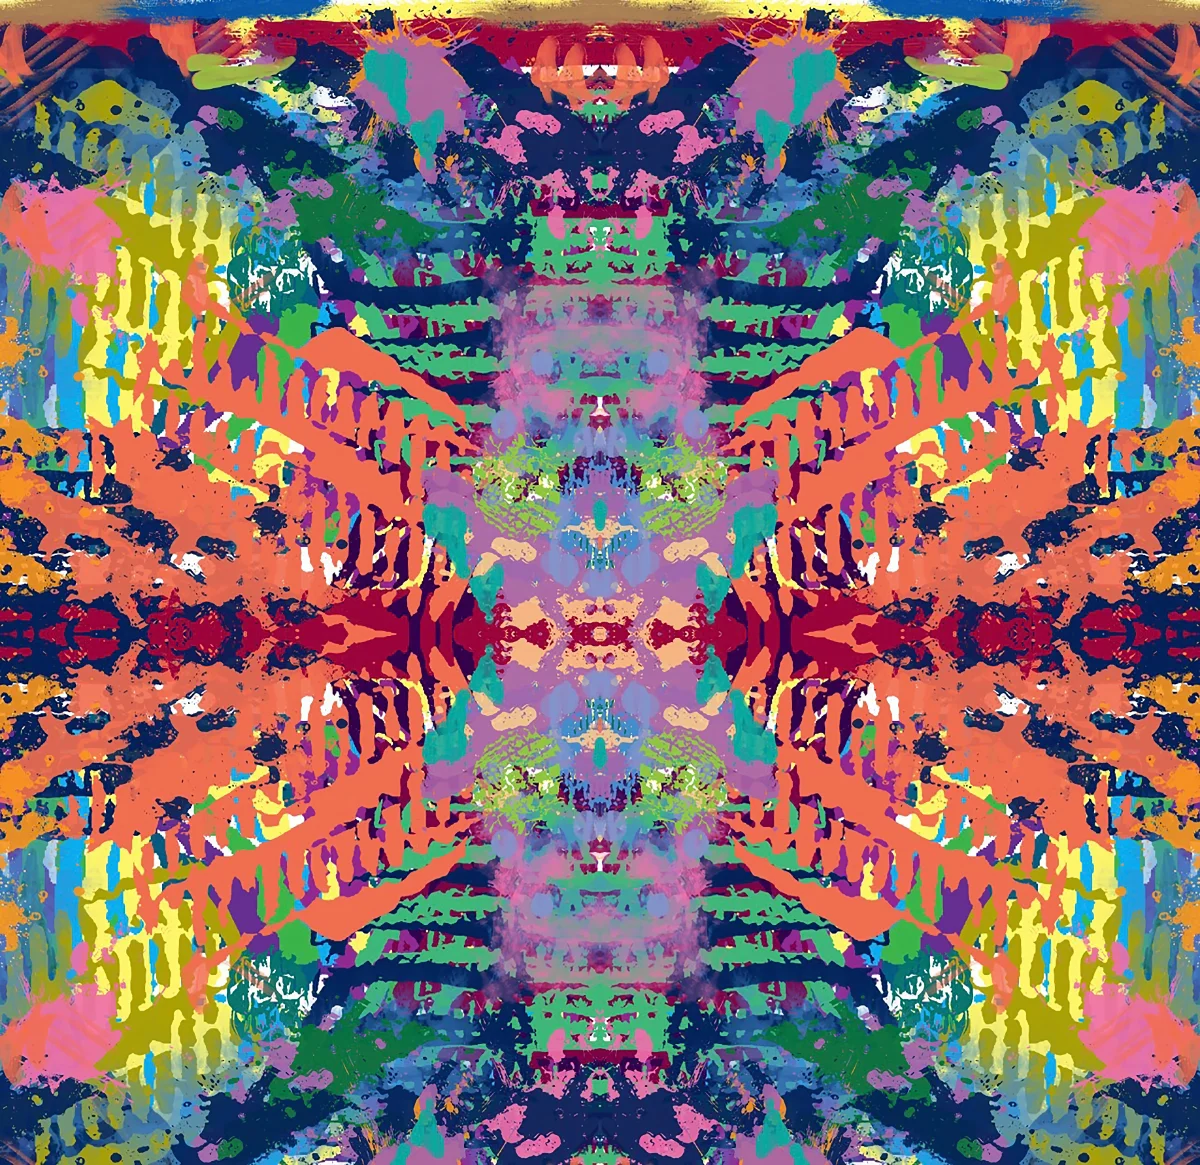 A digital altered colorful, abstract painting. The painting is mirrored both on the horizontal and vertical axes, creating four similar quadrants. The brightly and strongly pigmented paint is laid down in various colors and strokes creating a kaleidoscopic effect.